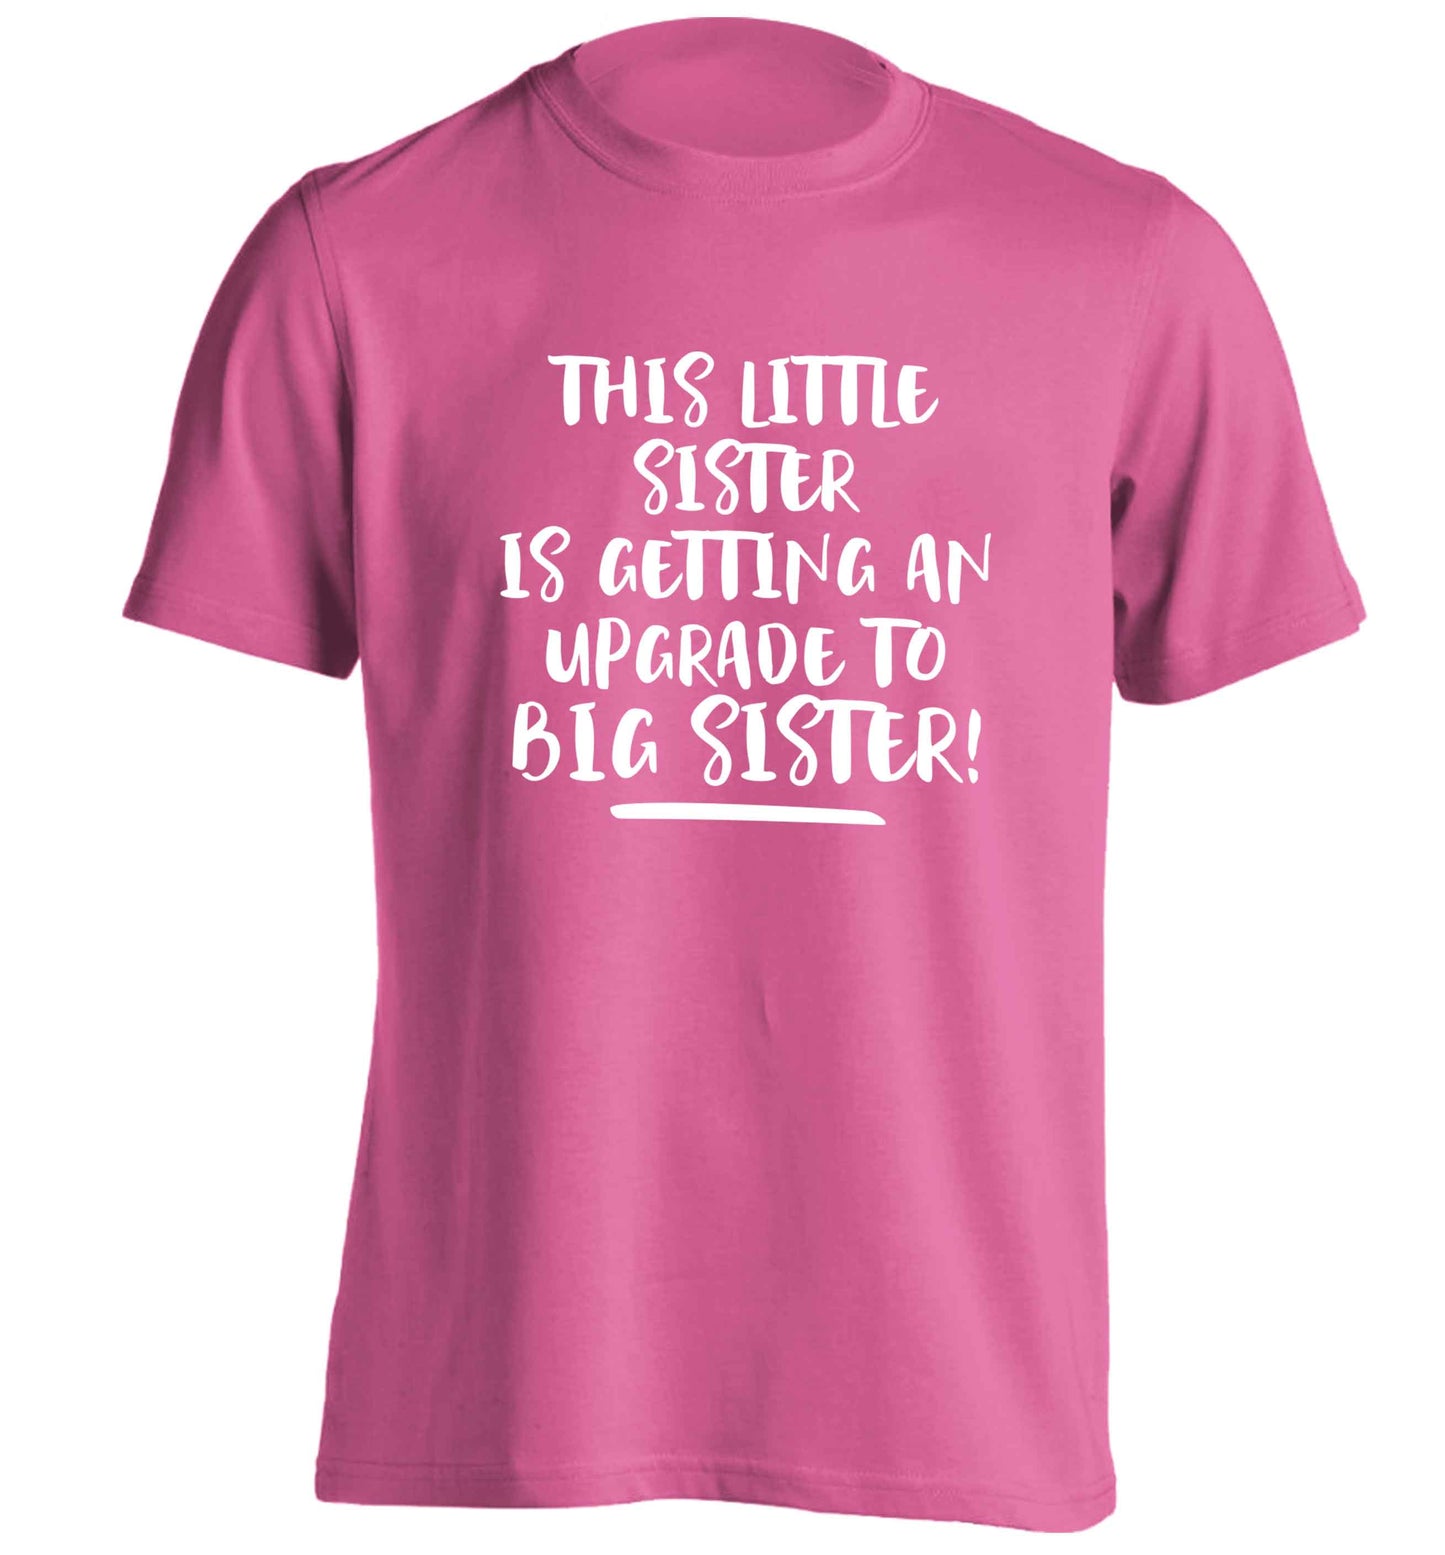 This little sister is getting an upgrade to big sister! adults unisex pink Tshirt 2XL